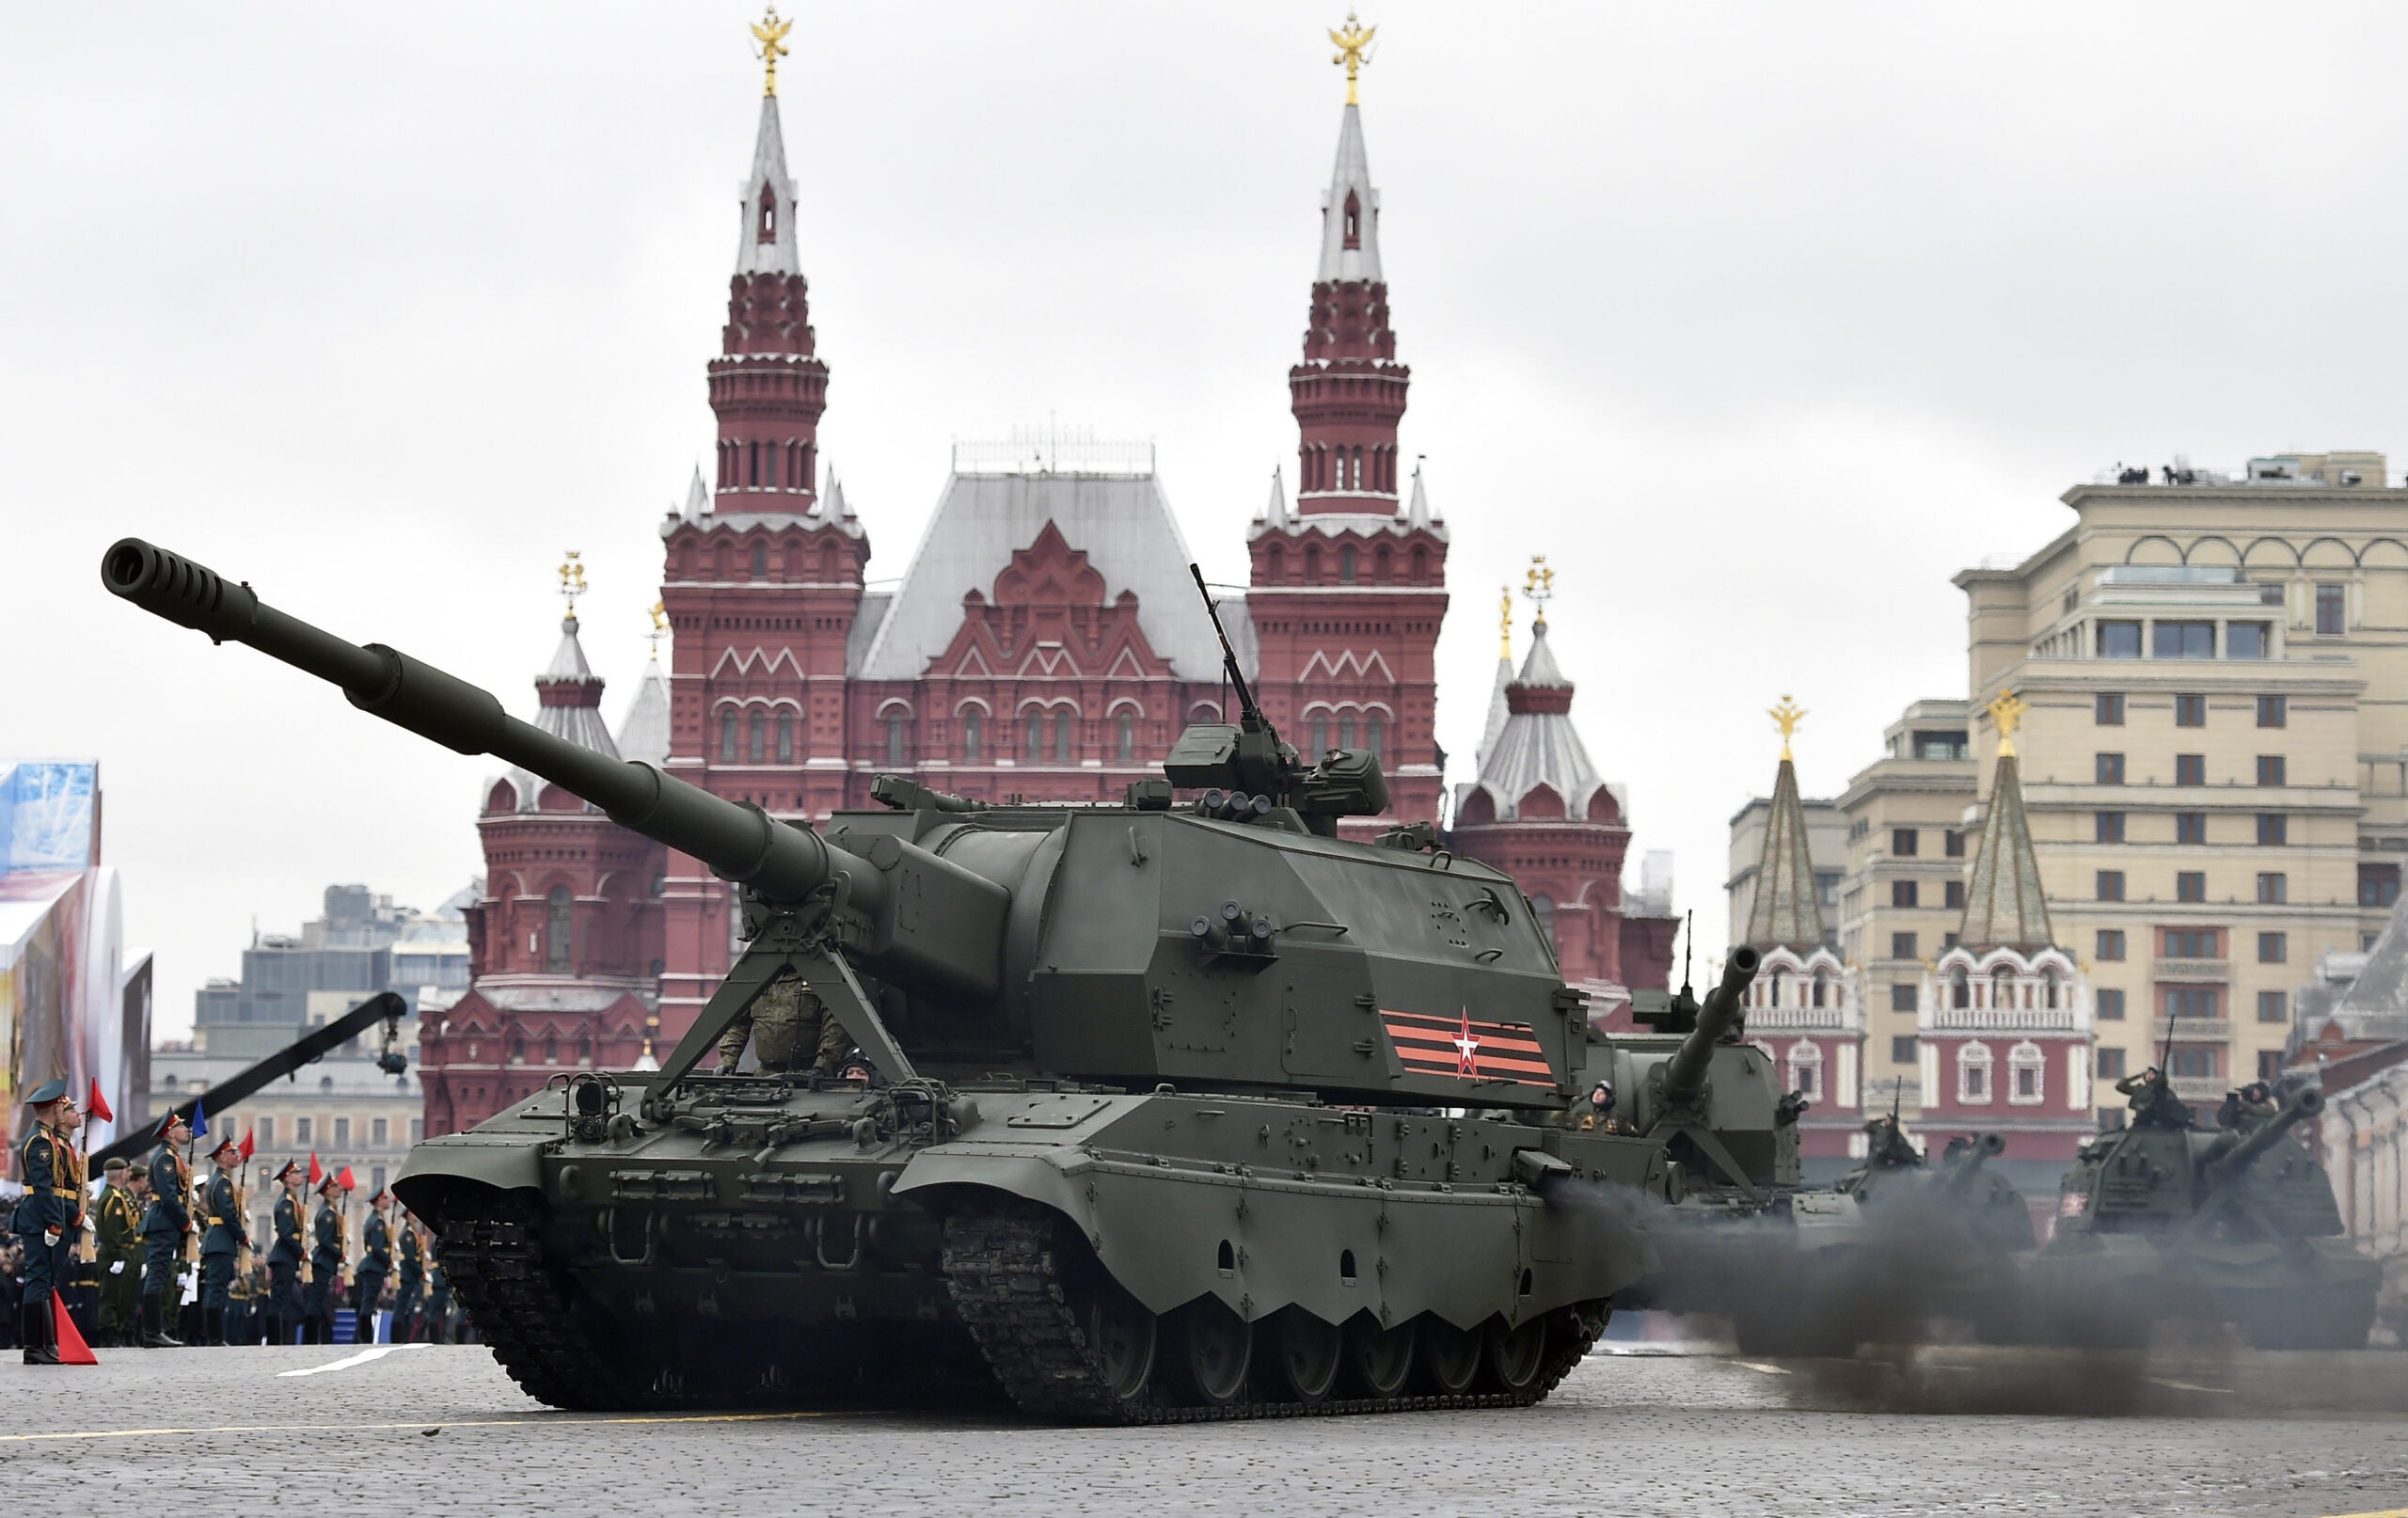 Russian Koalitsiya-SV self-propelled howitzers ride through Red Square during the Victory Day military parade in Moscow on May 9, 2017.
Russia marks the 72nd anniversary of the Soviet Union's victory over Nazi Germany in World War Two. / AFP PHOTO / Natalia KOLESNIKOVA        (Photo credit should read NATALIA KOLESNIKOVA/AFP via Getty Images)